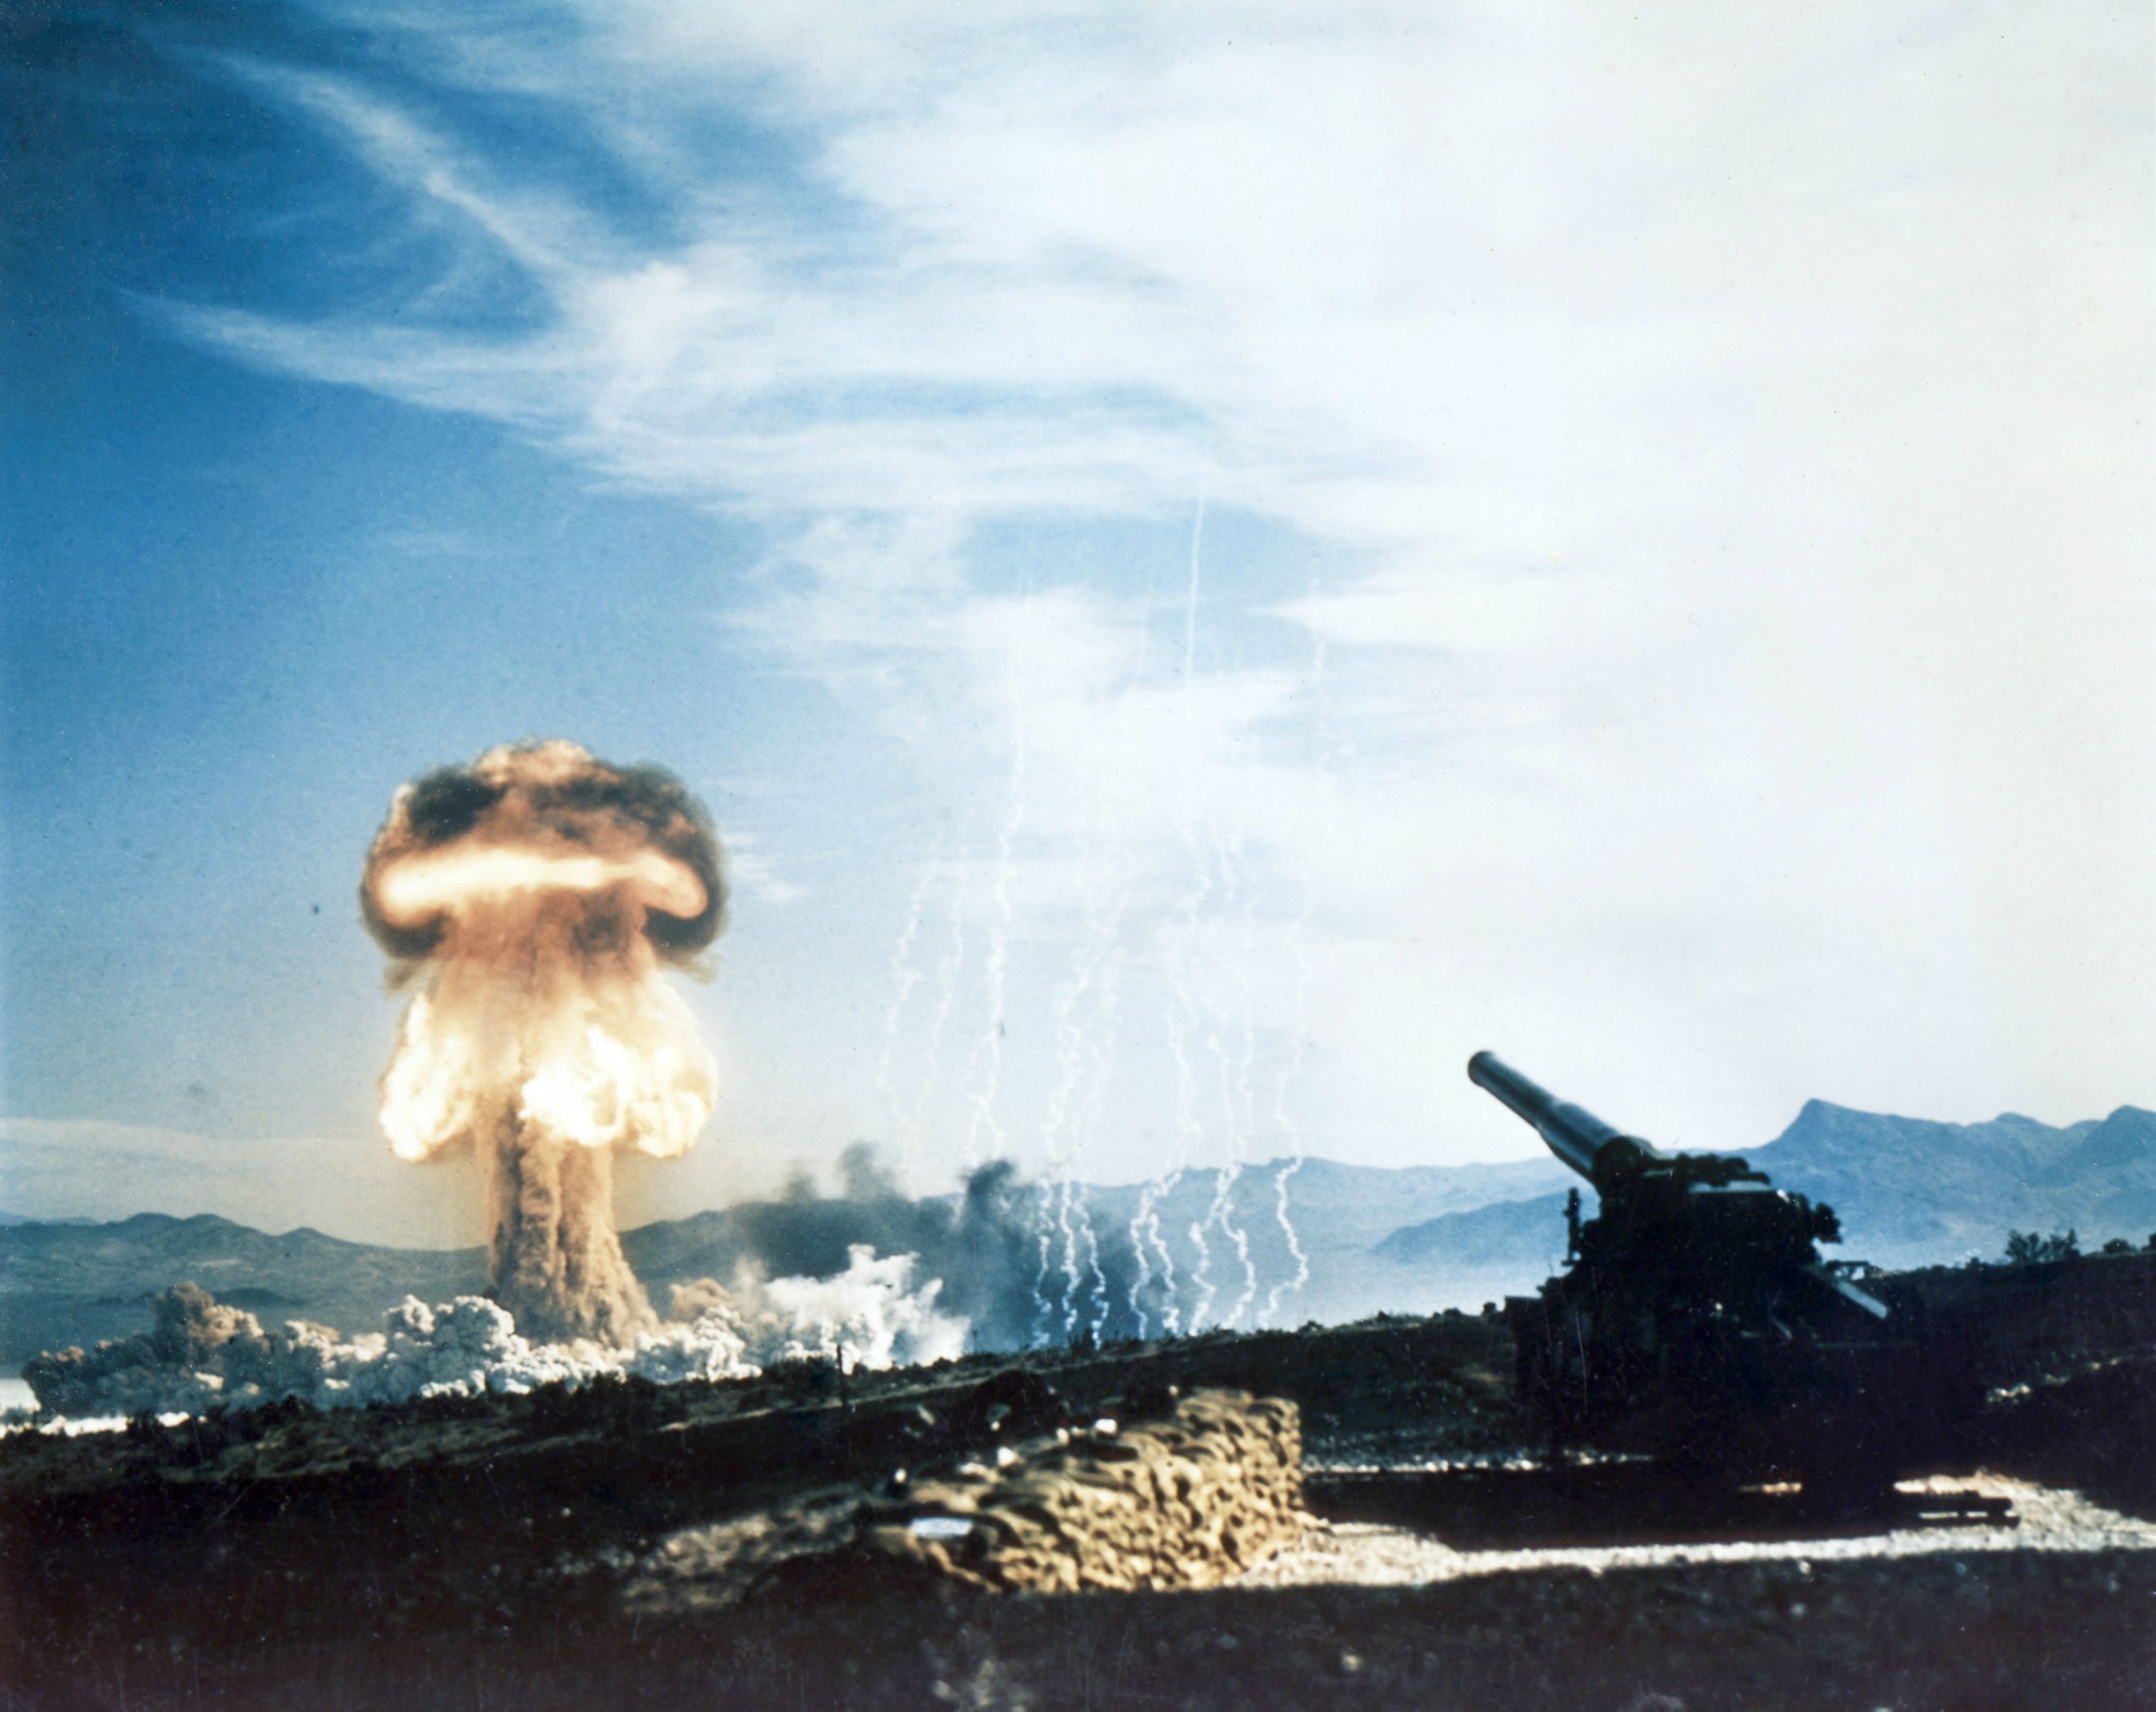 A 15 kiloton nuclear weapon detonates about 10 km from the cannon it was fired from, Nevada Test Site, May 1953